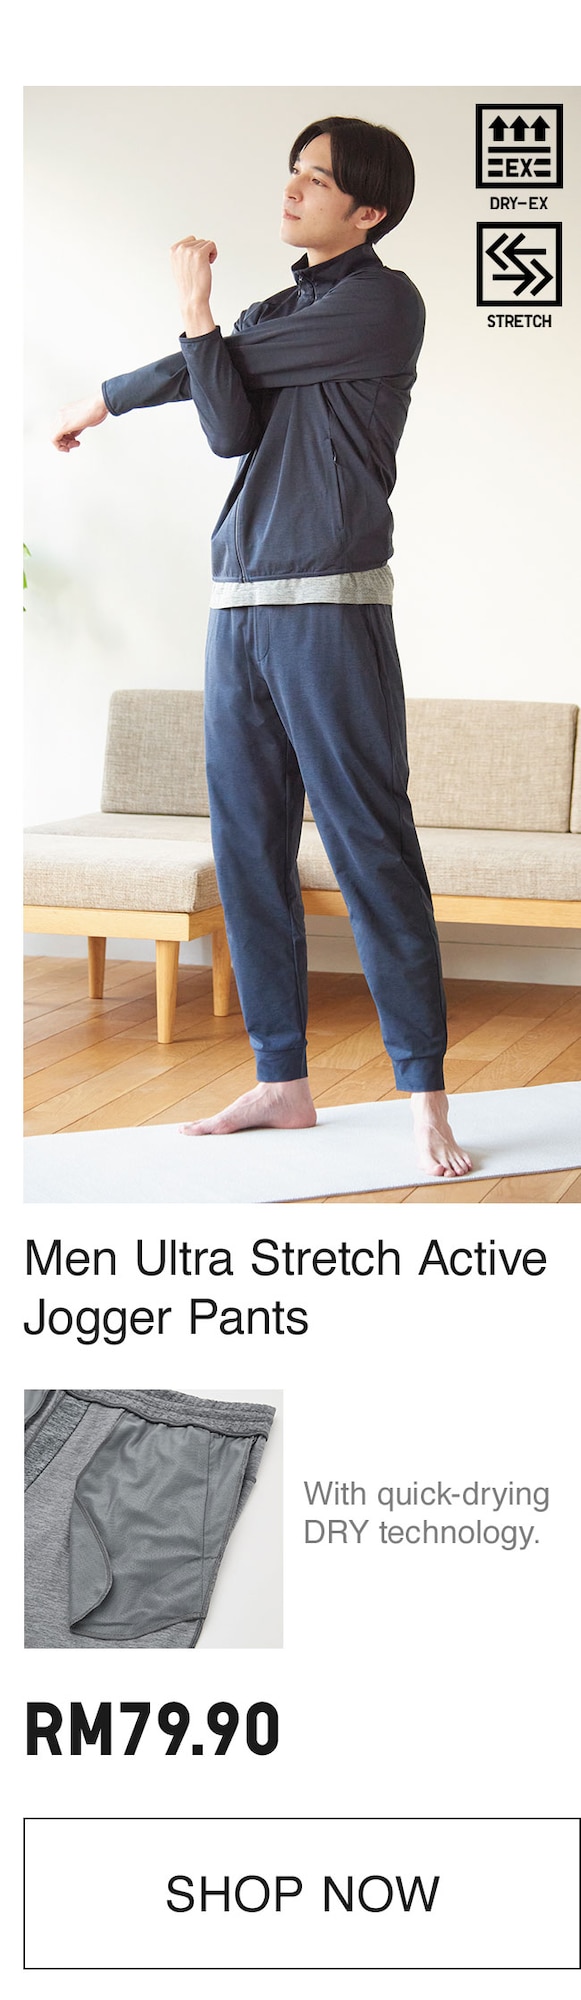 ULTRA STRETCH ACTIVE JOGGER PANTS